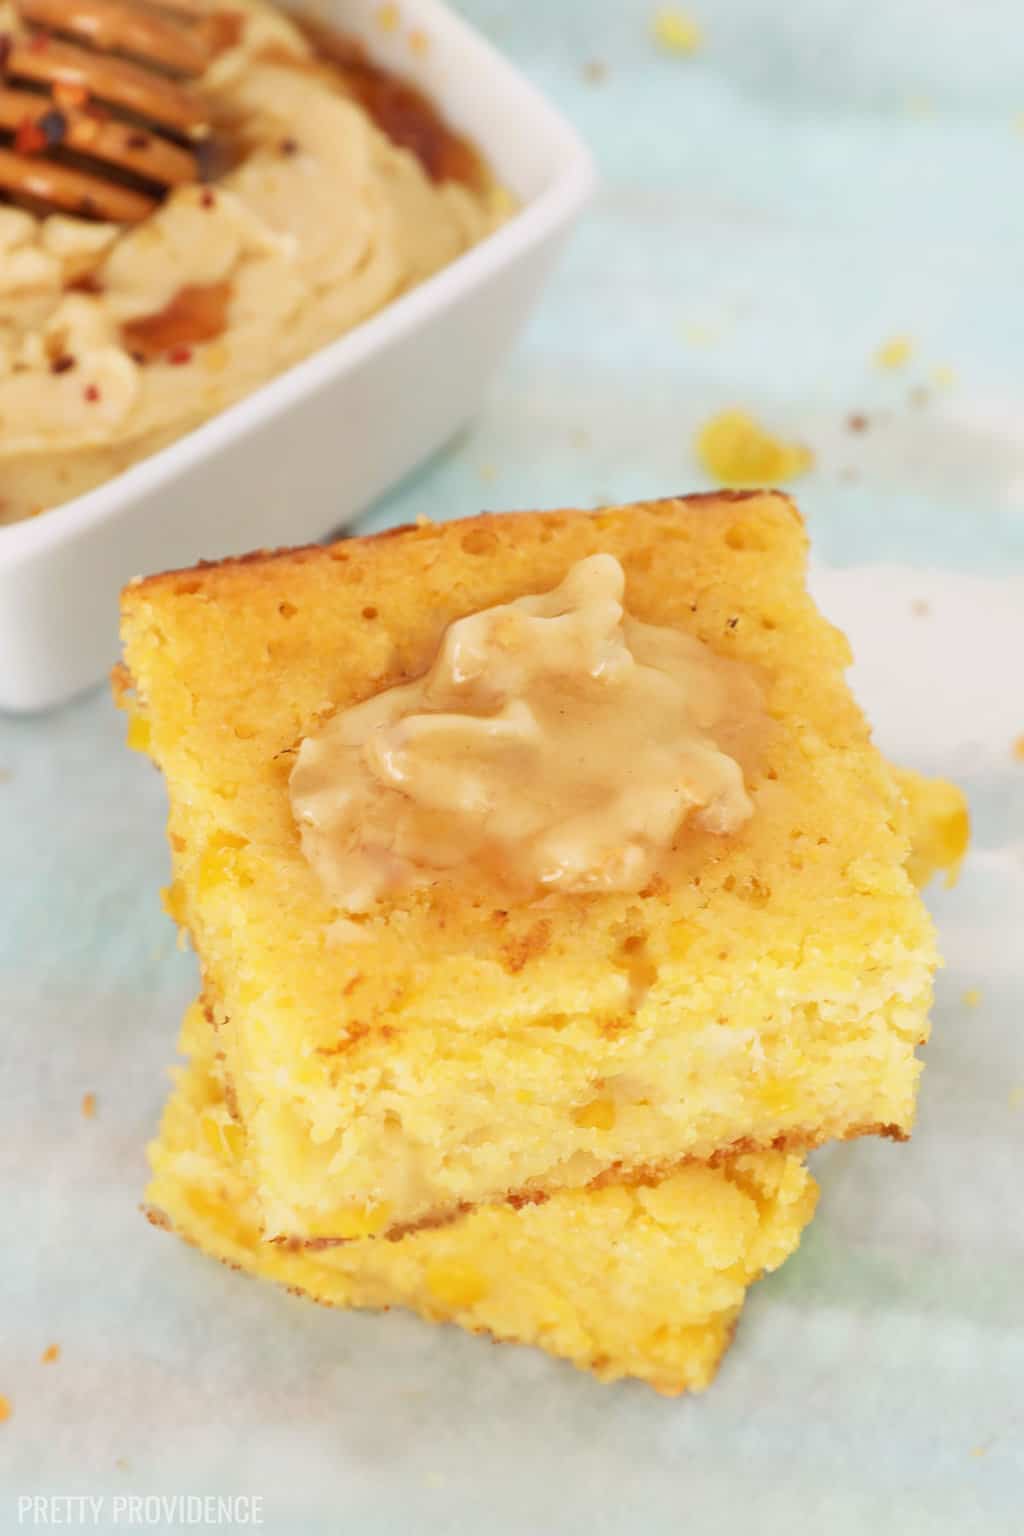 My Grandma's AMAZING semi-homemade cornbread recipe! No one you make this for would believe how easy it is to make.. to die for good! 